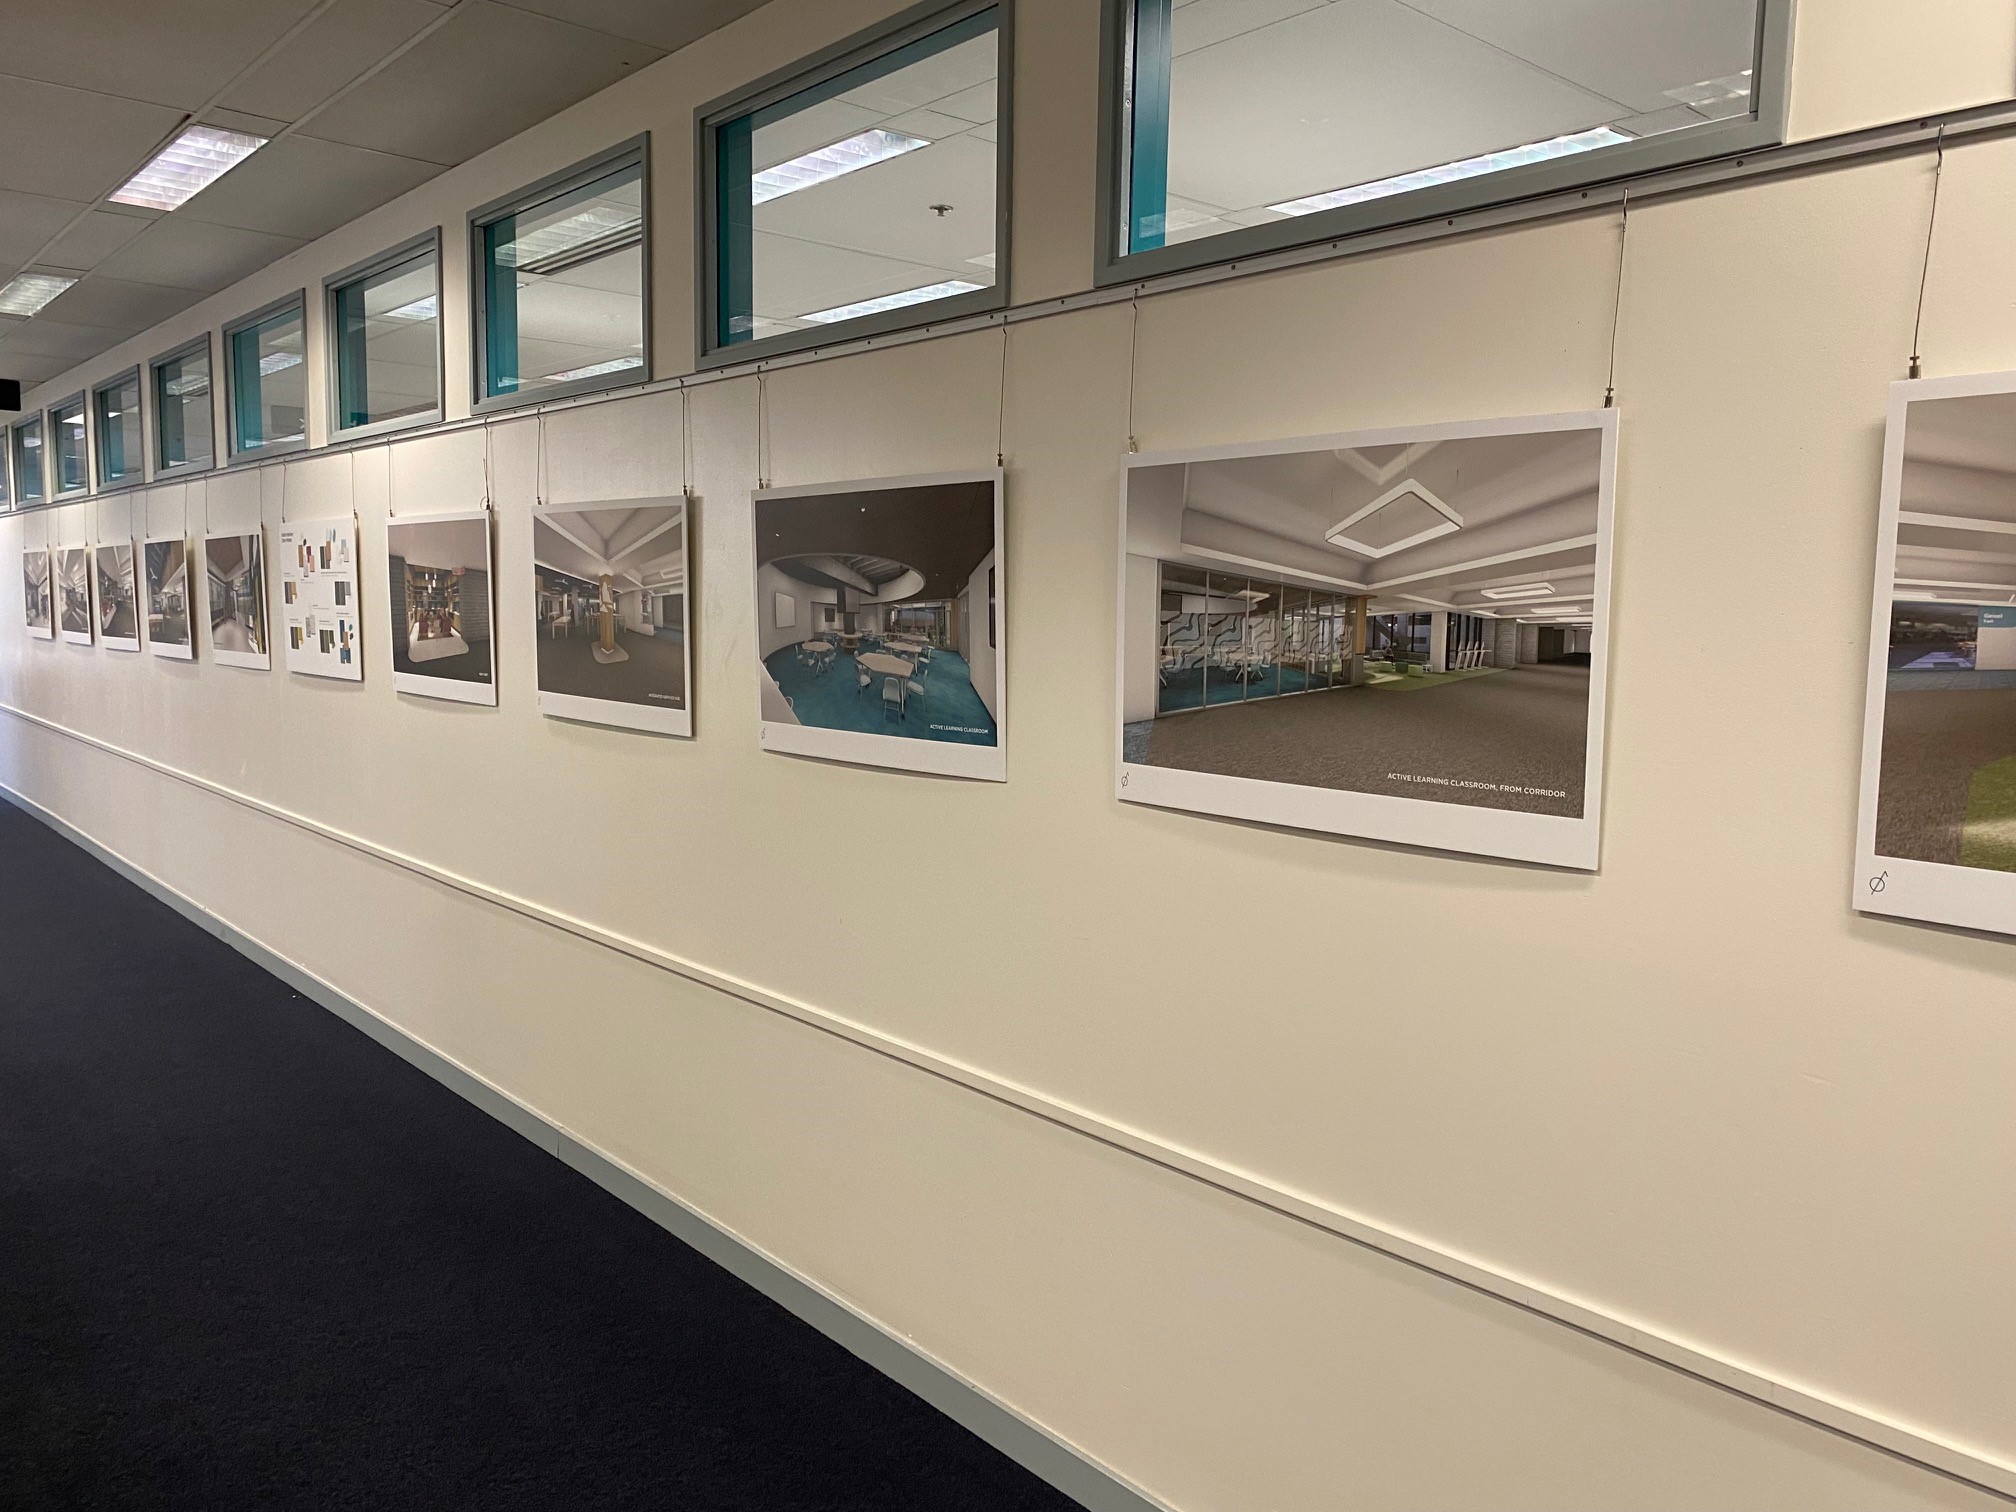 Poster boards with renderings of the renovations at Geisel Library hanging on a wall.